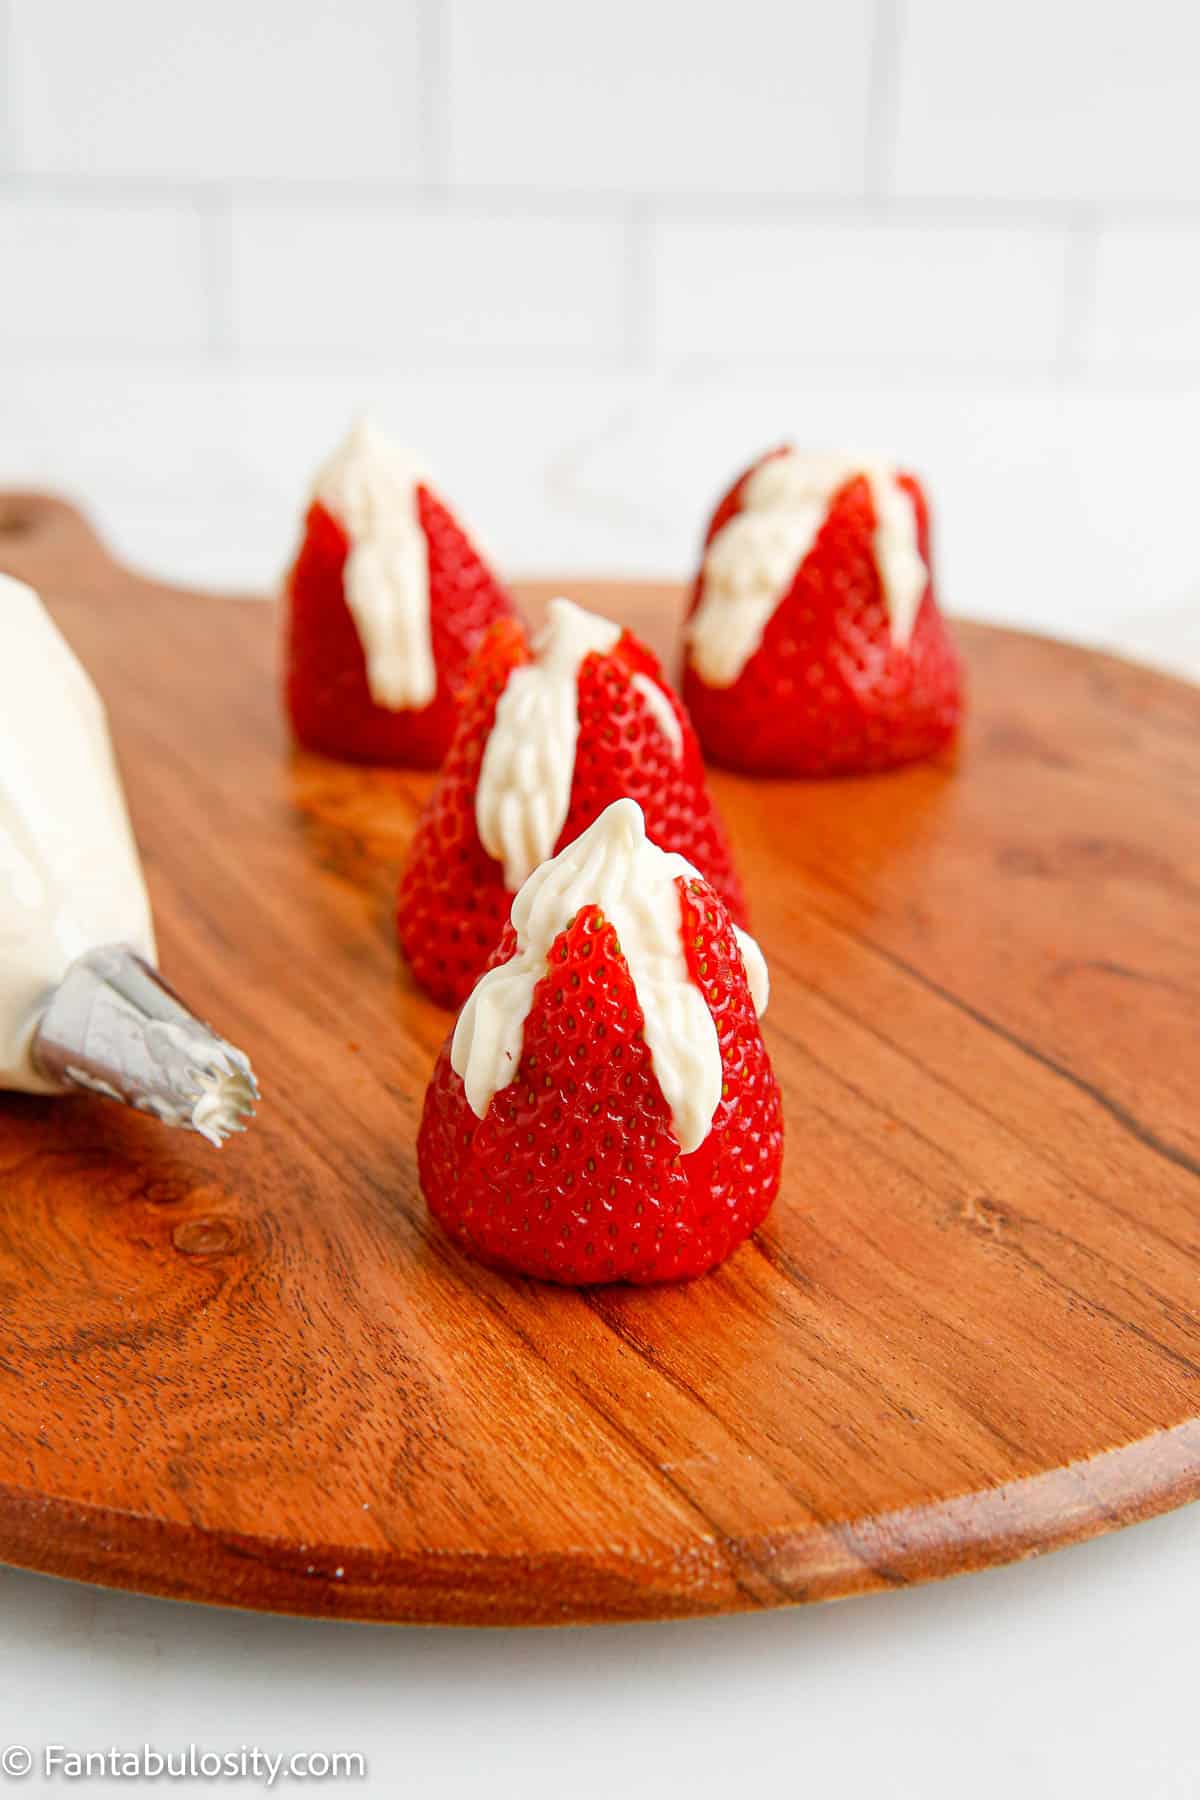 Piped strawberries with cream filling on cutting board